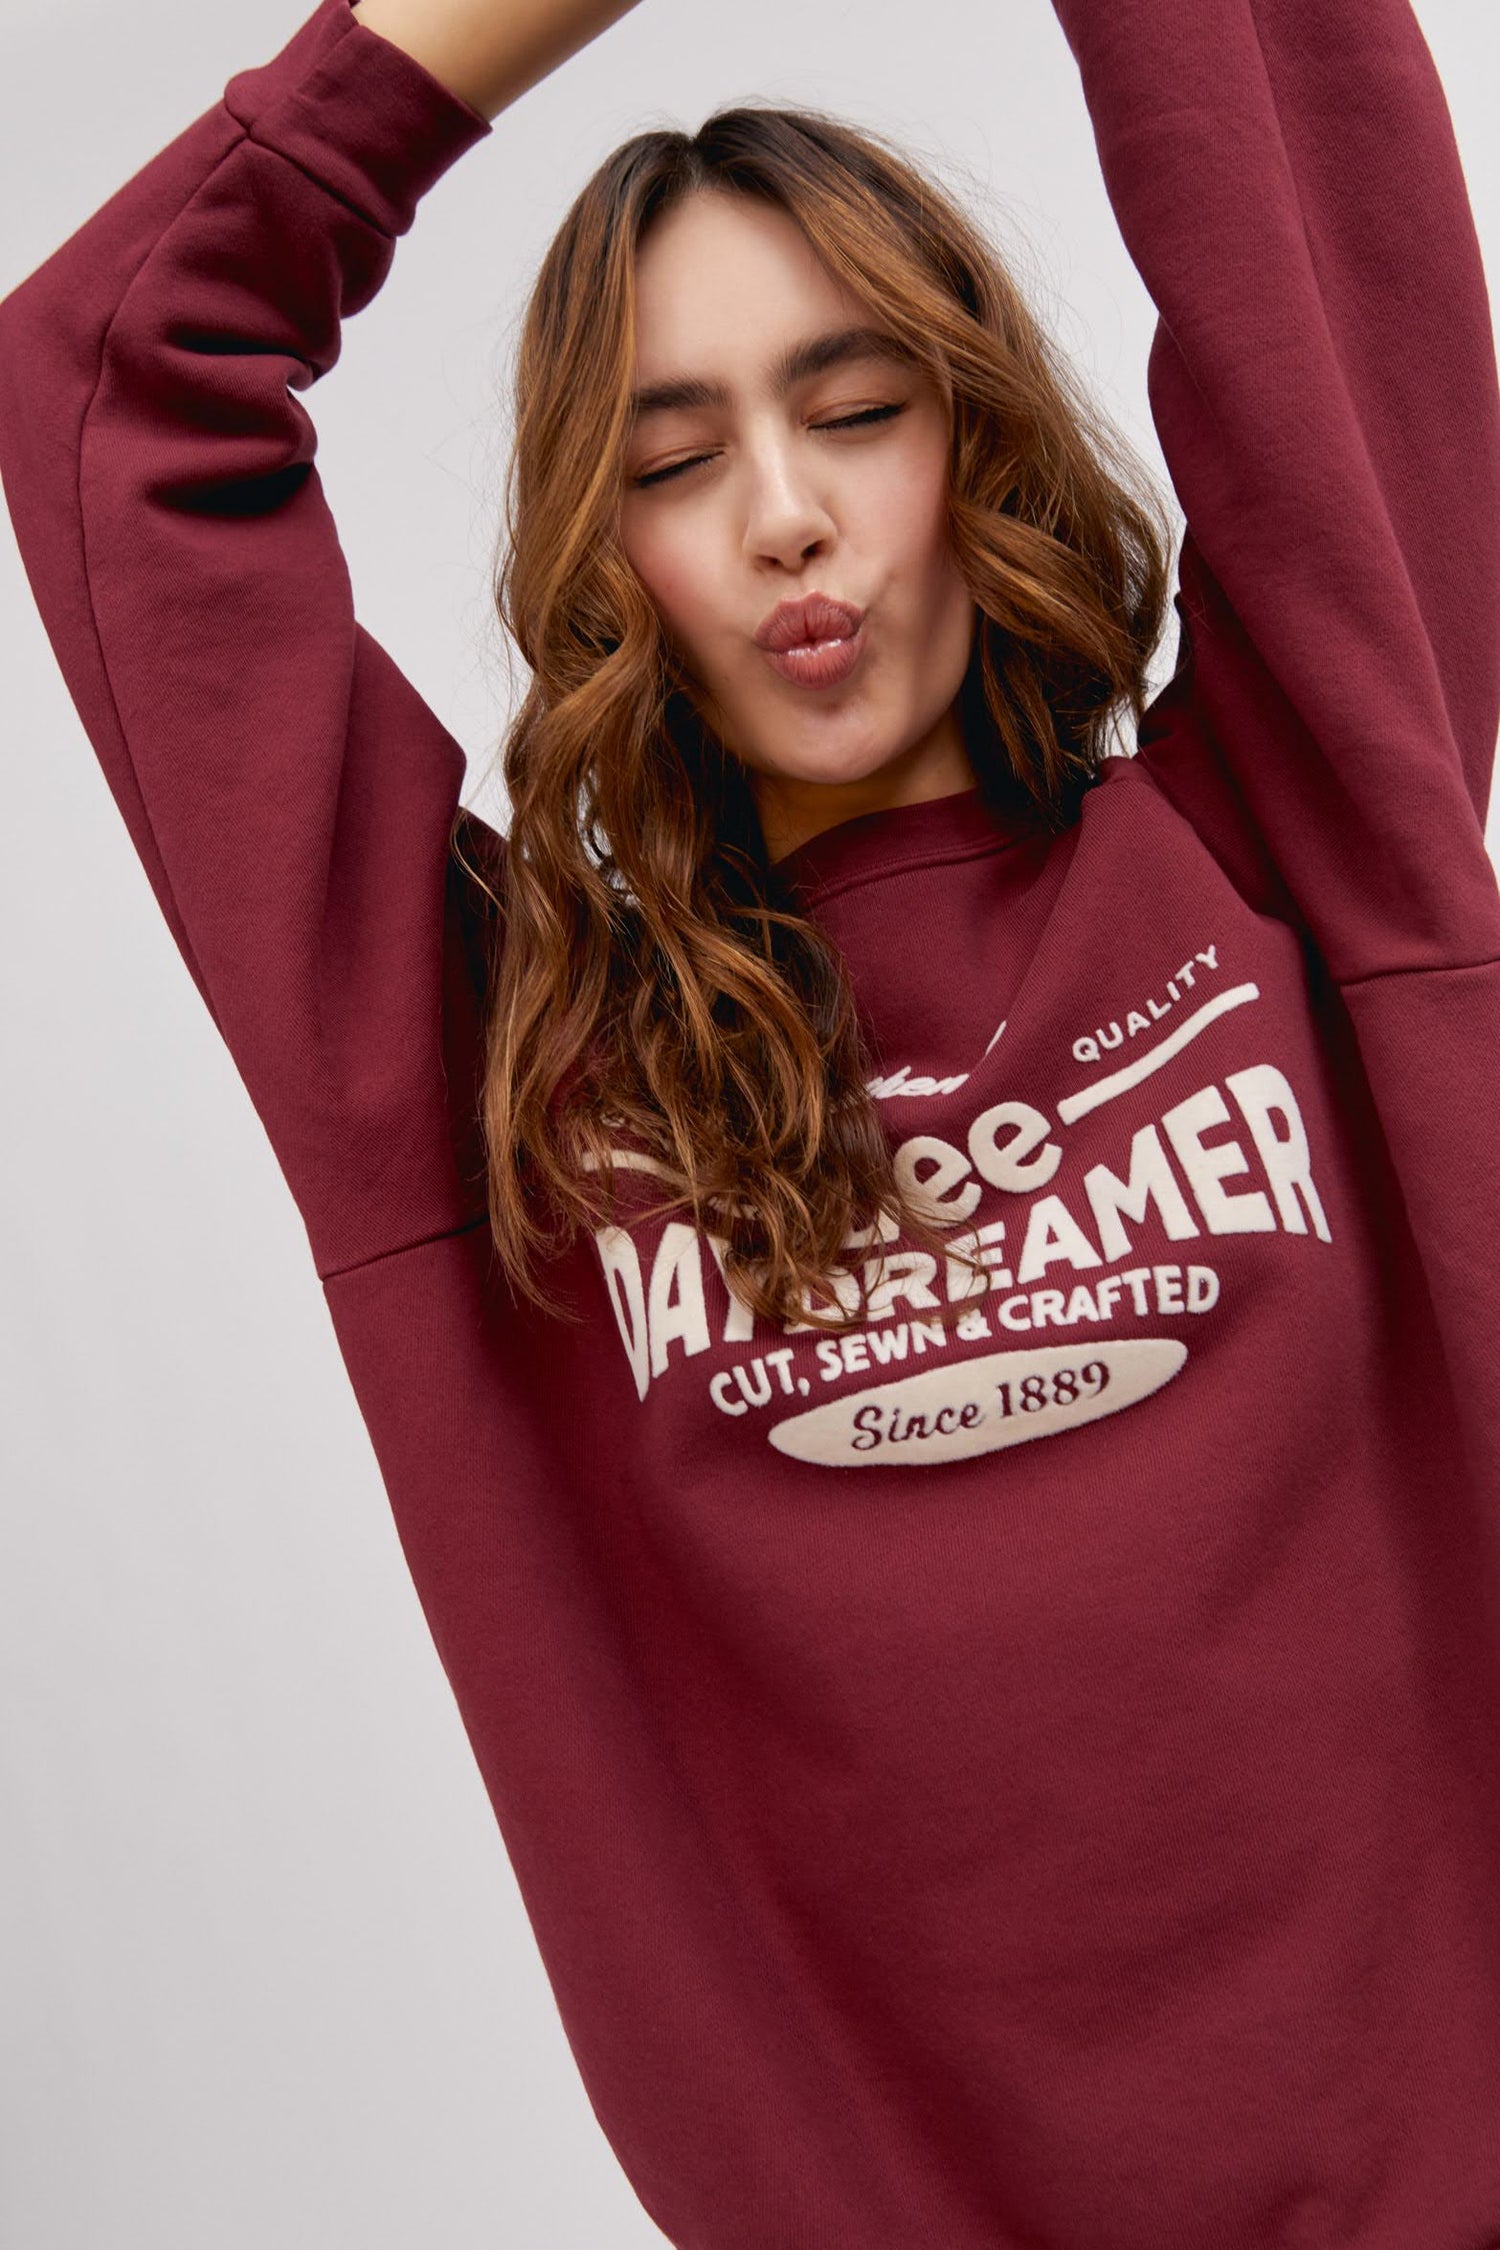 long haired model making kissing face and wearing maroon colored sweatshirt with flocked logo graphics